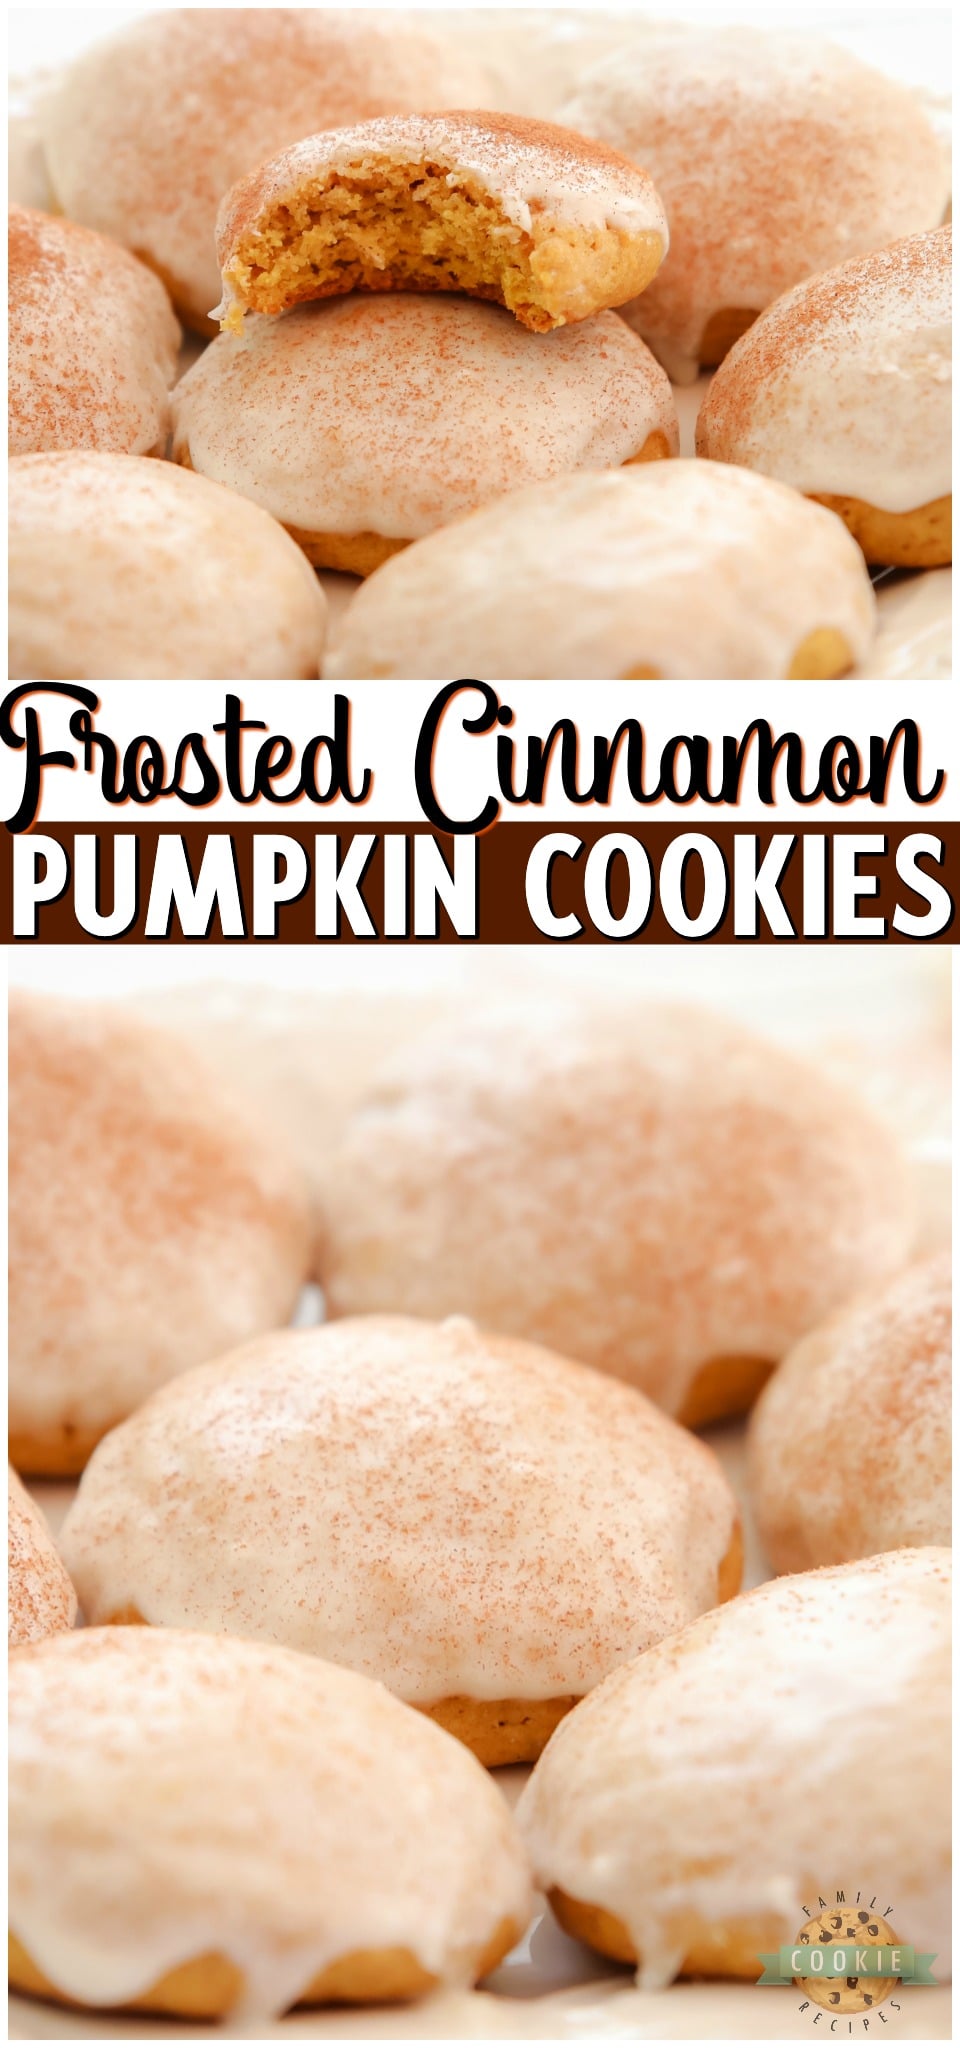 Iced Cinnamon Pumpkin Cookies are soft & pillowy pumpkin cookies topped with a simple vanilla icing and cinnamon. Lovely texture & flavor in these homemade pumpkin sugar cookies.